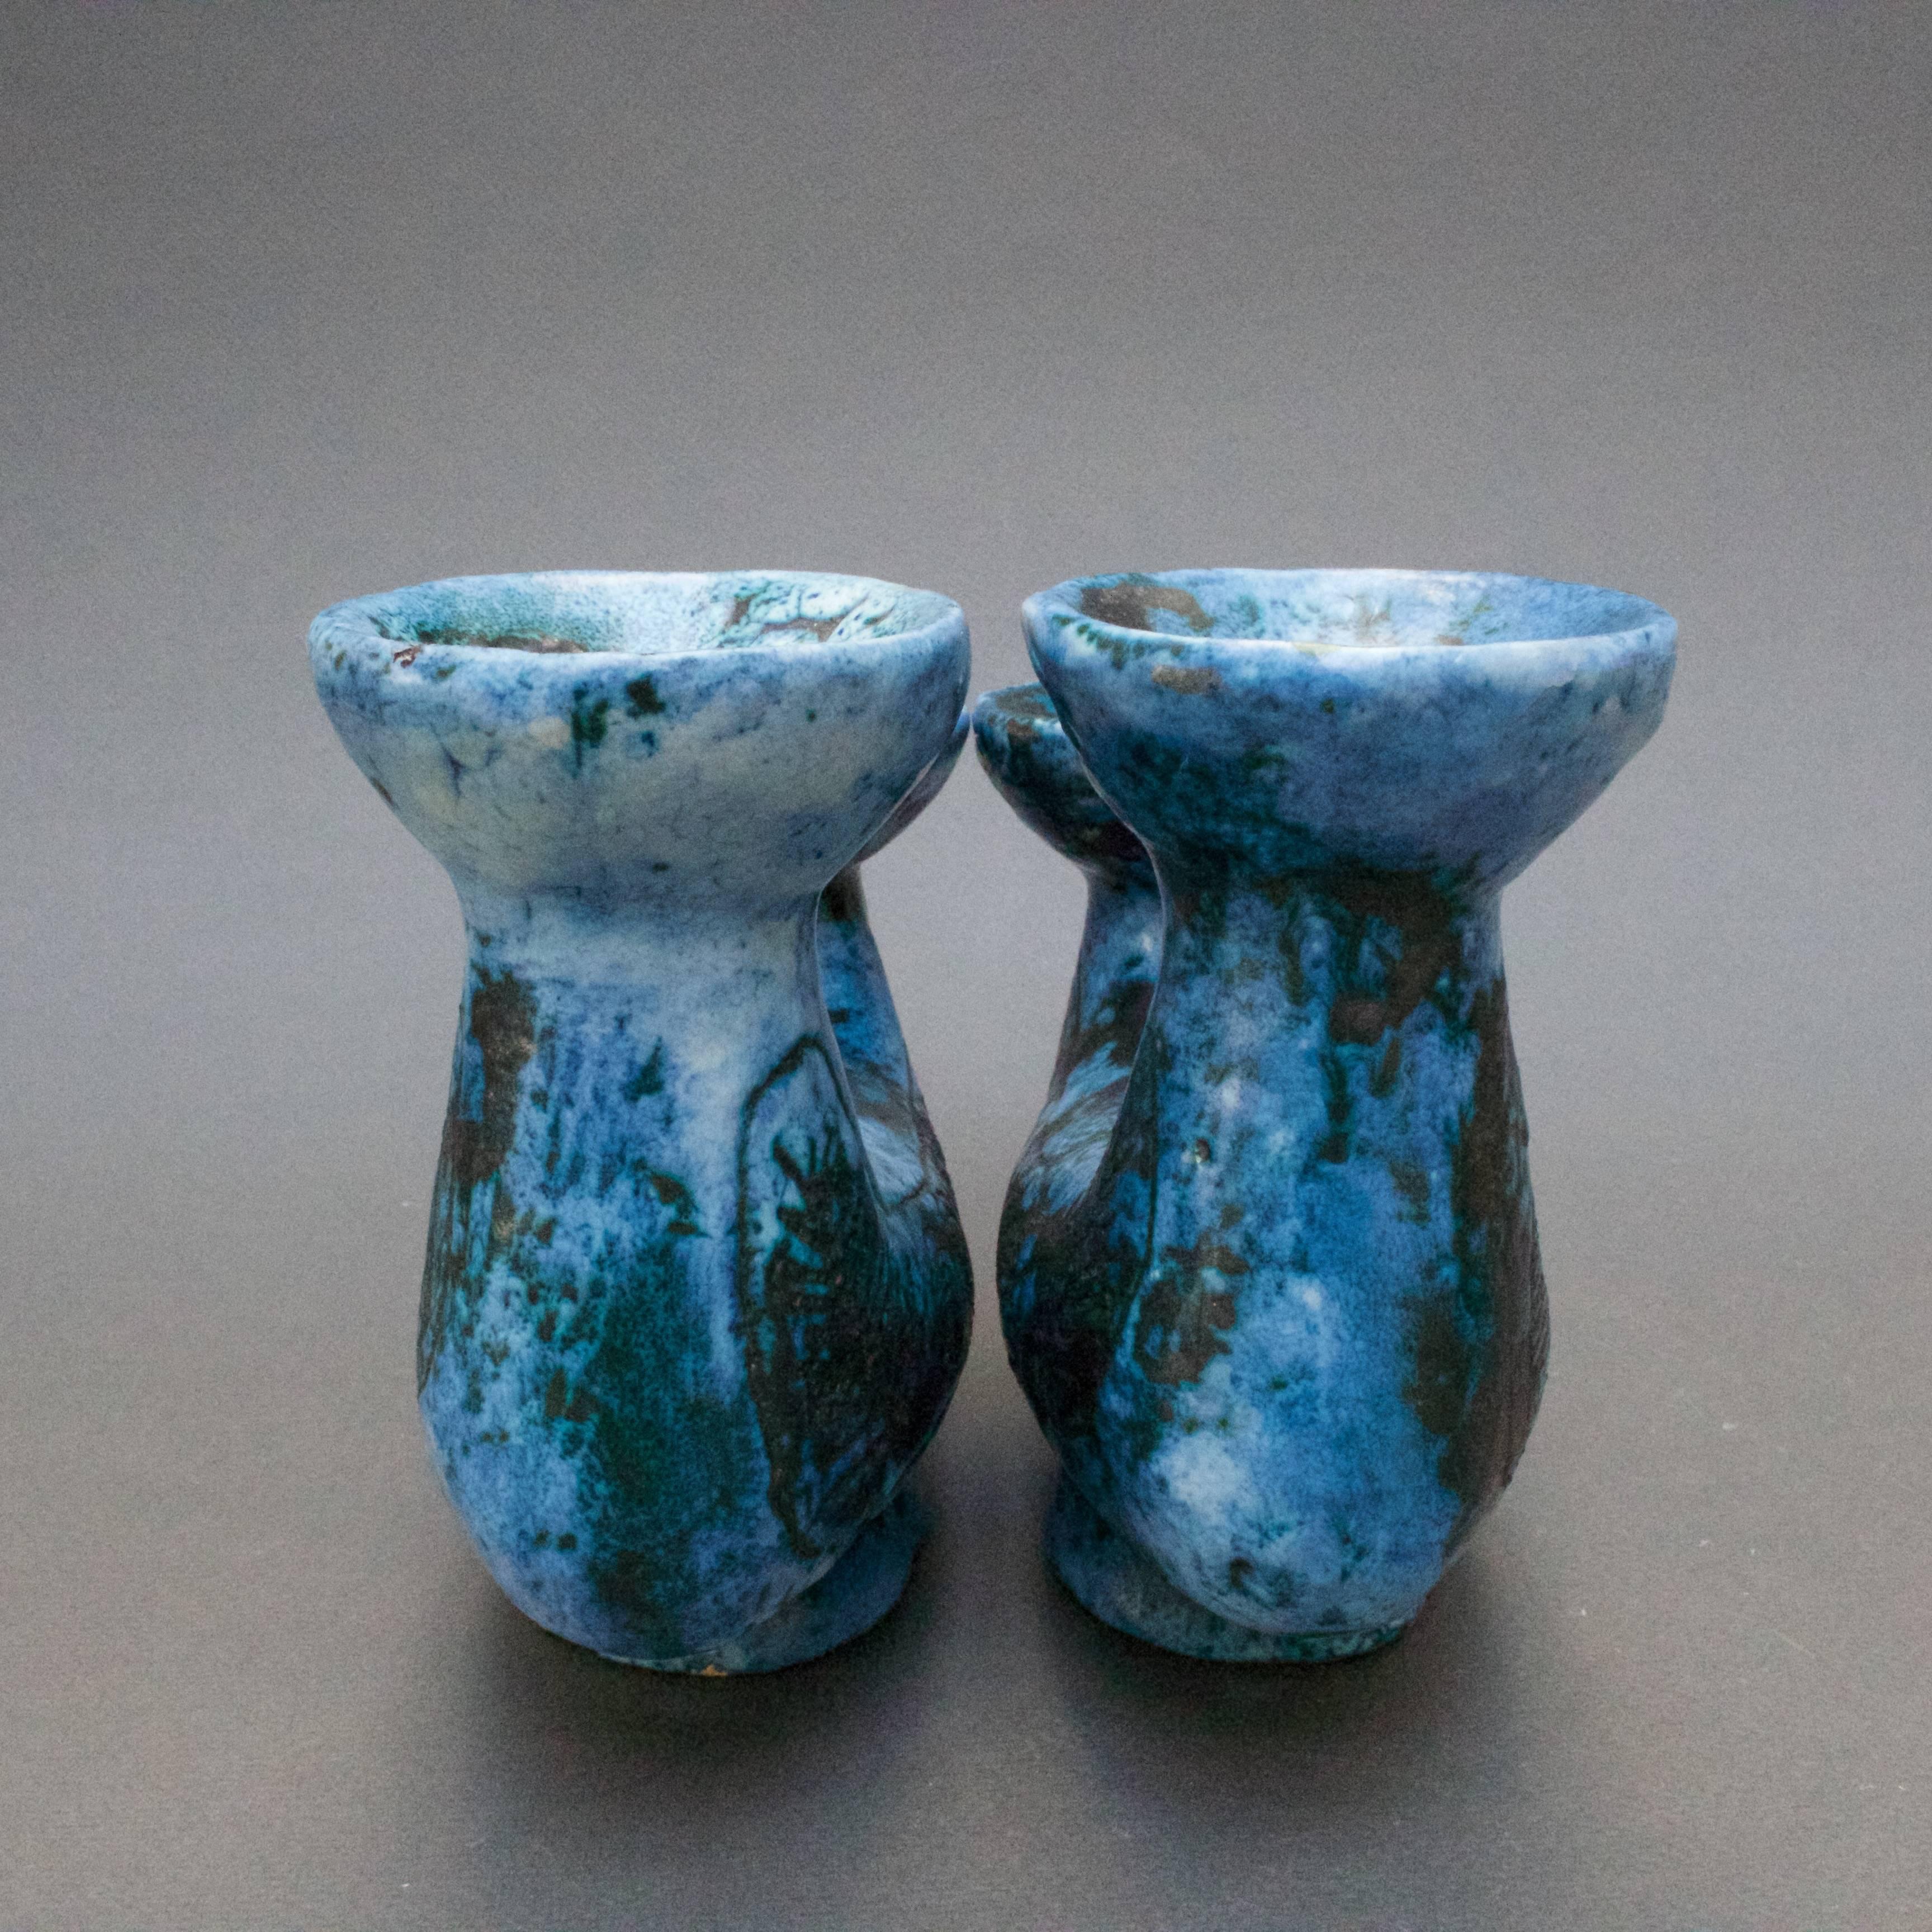 French Pair of Ceramic Blue Candle Holders by Jacques Blin, Vallauris, circa 1950s